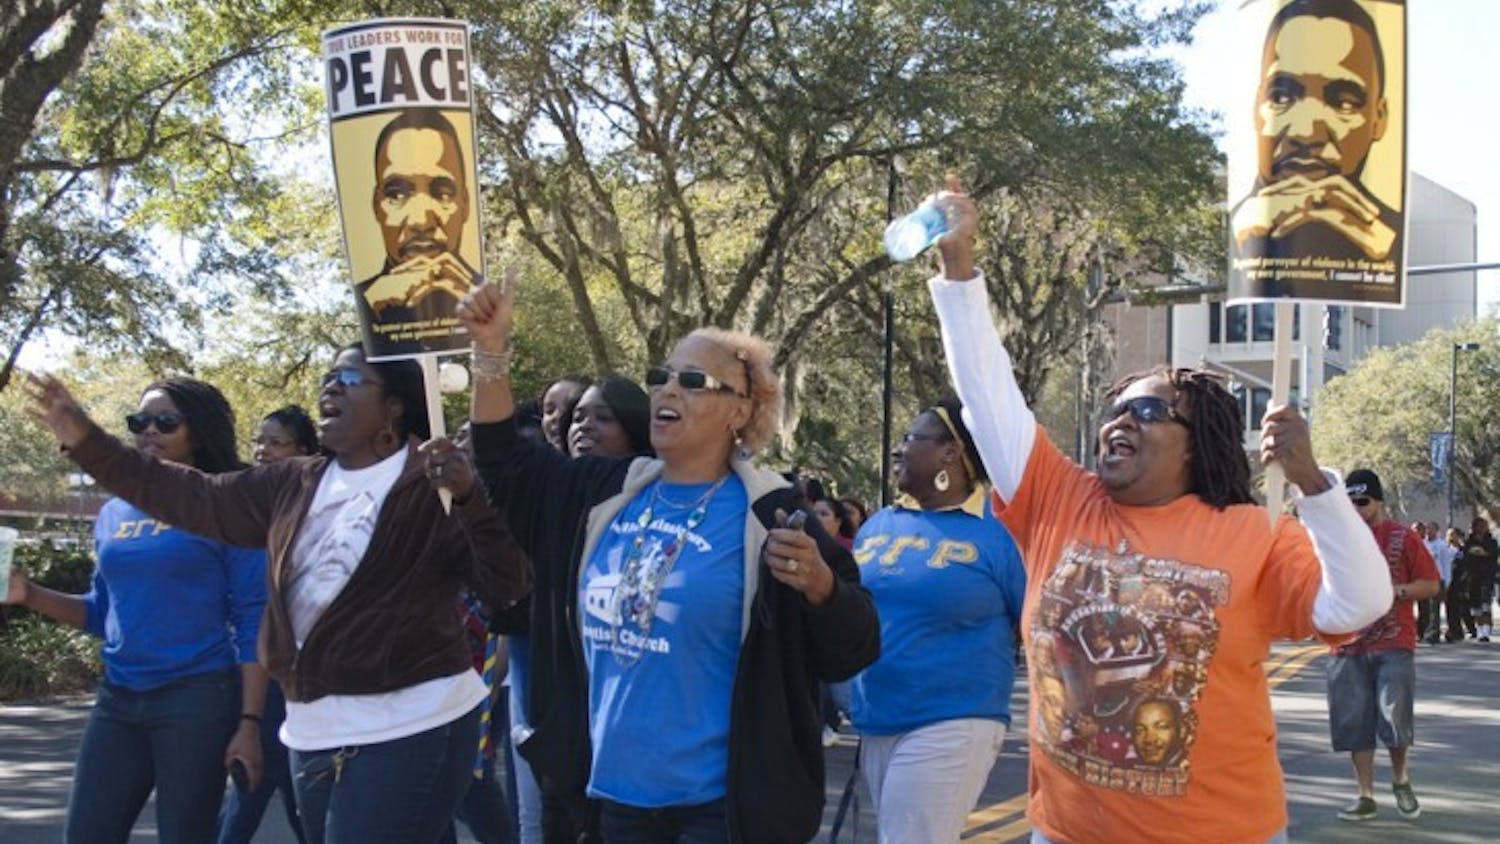 Marchers celebrate the life and work of Martin Luther King Jr. at the annual King Celebration Commemorative March on Monday afternoon in Bo Diddley Community Plaza.